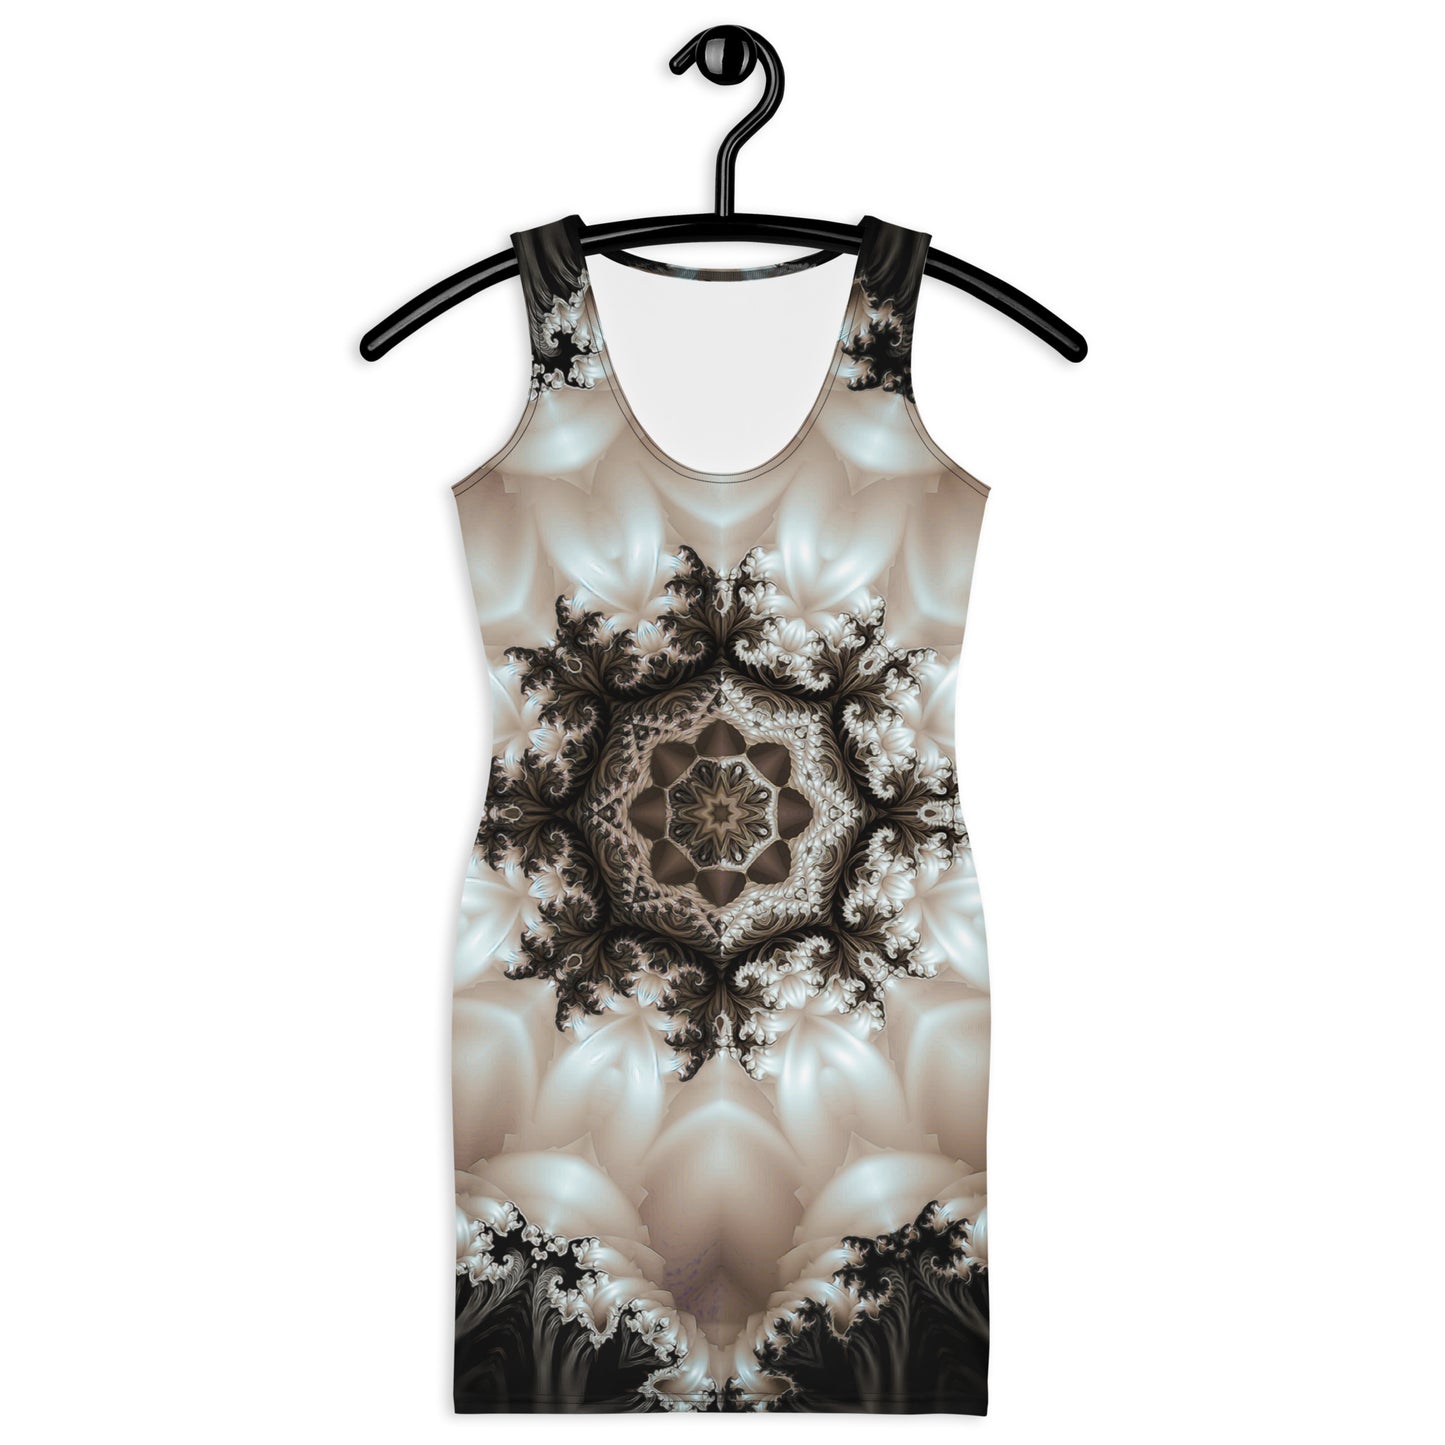 "Duality" Bodycon FITTED DRESS